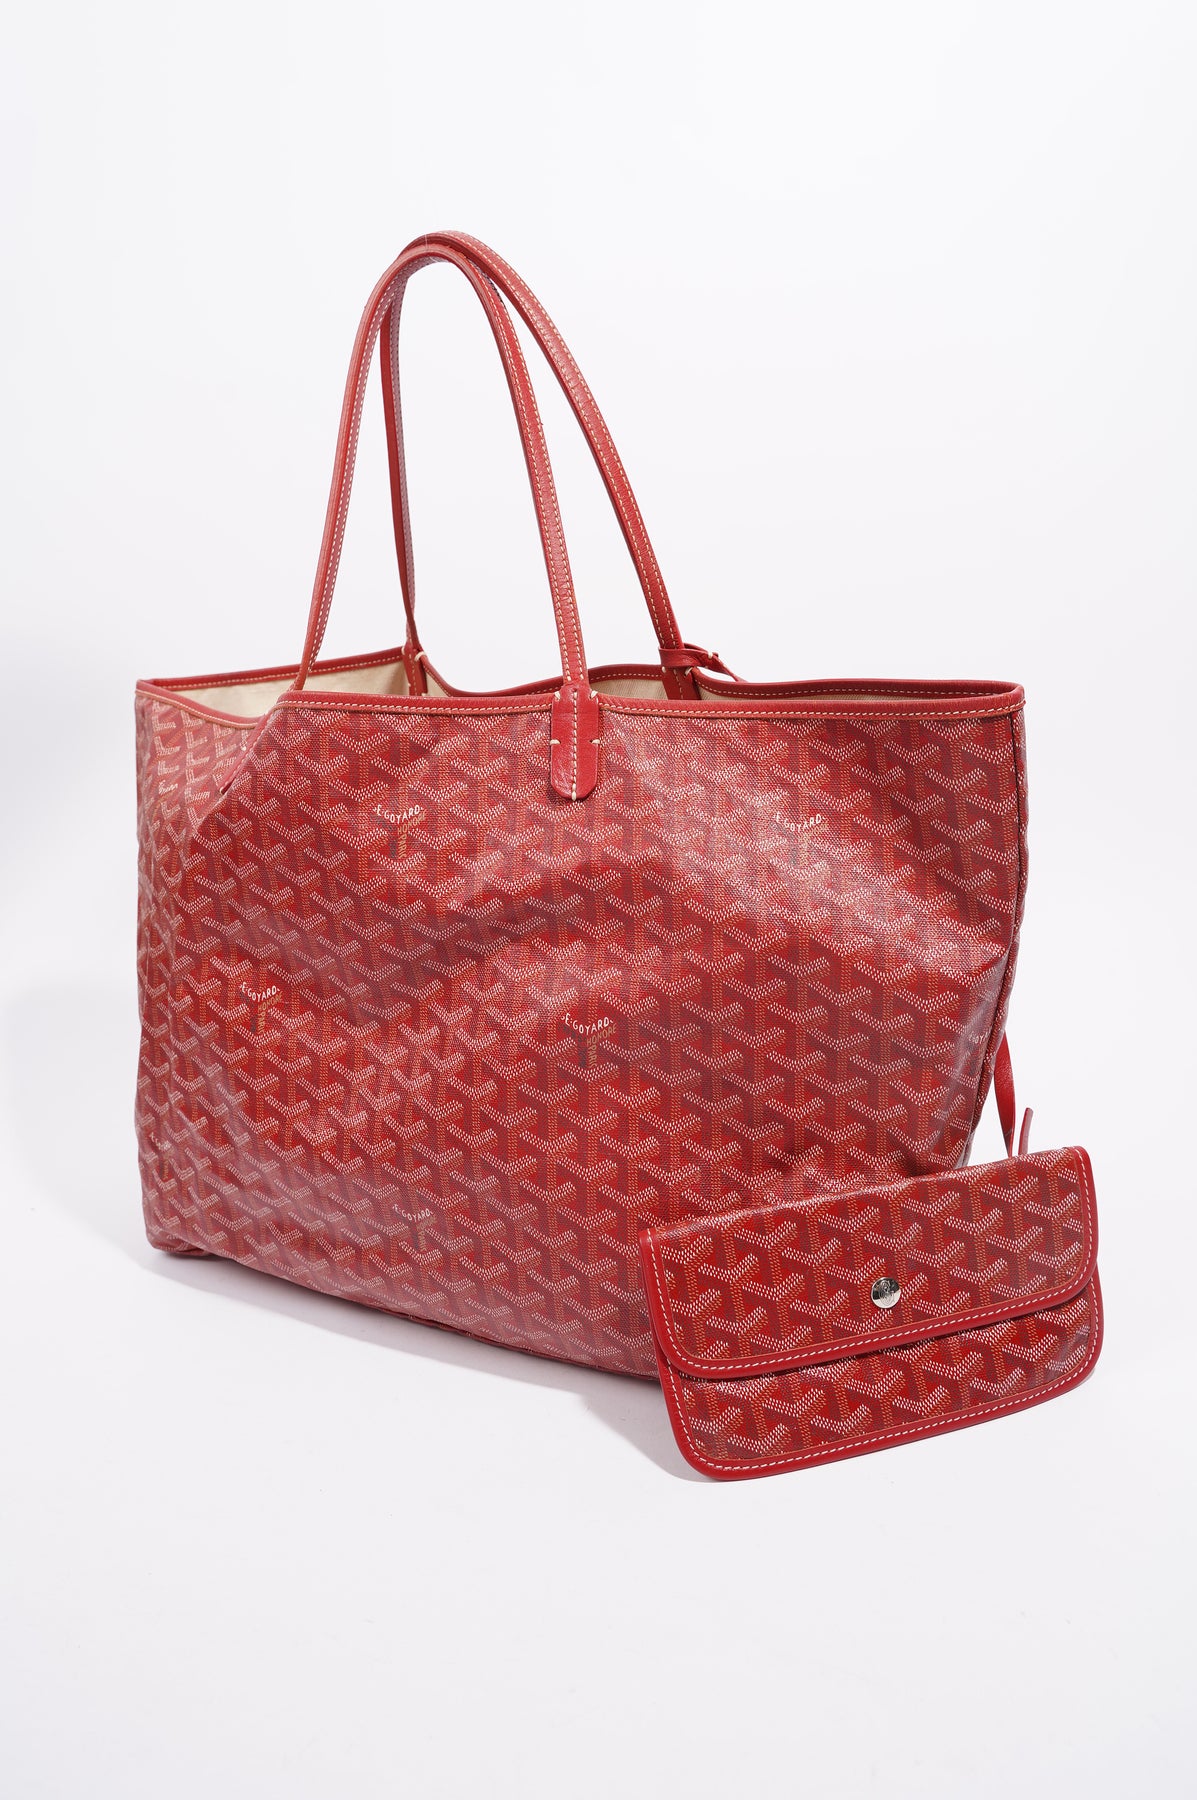 Shop Blue Goyard Bags Women Messenger with great discounts and